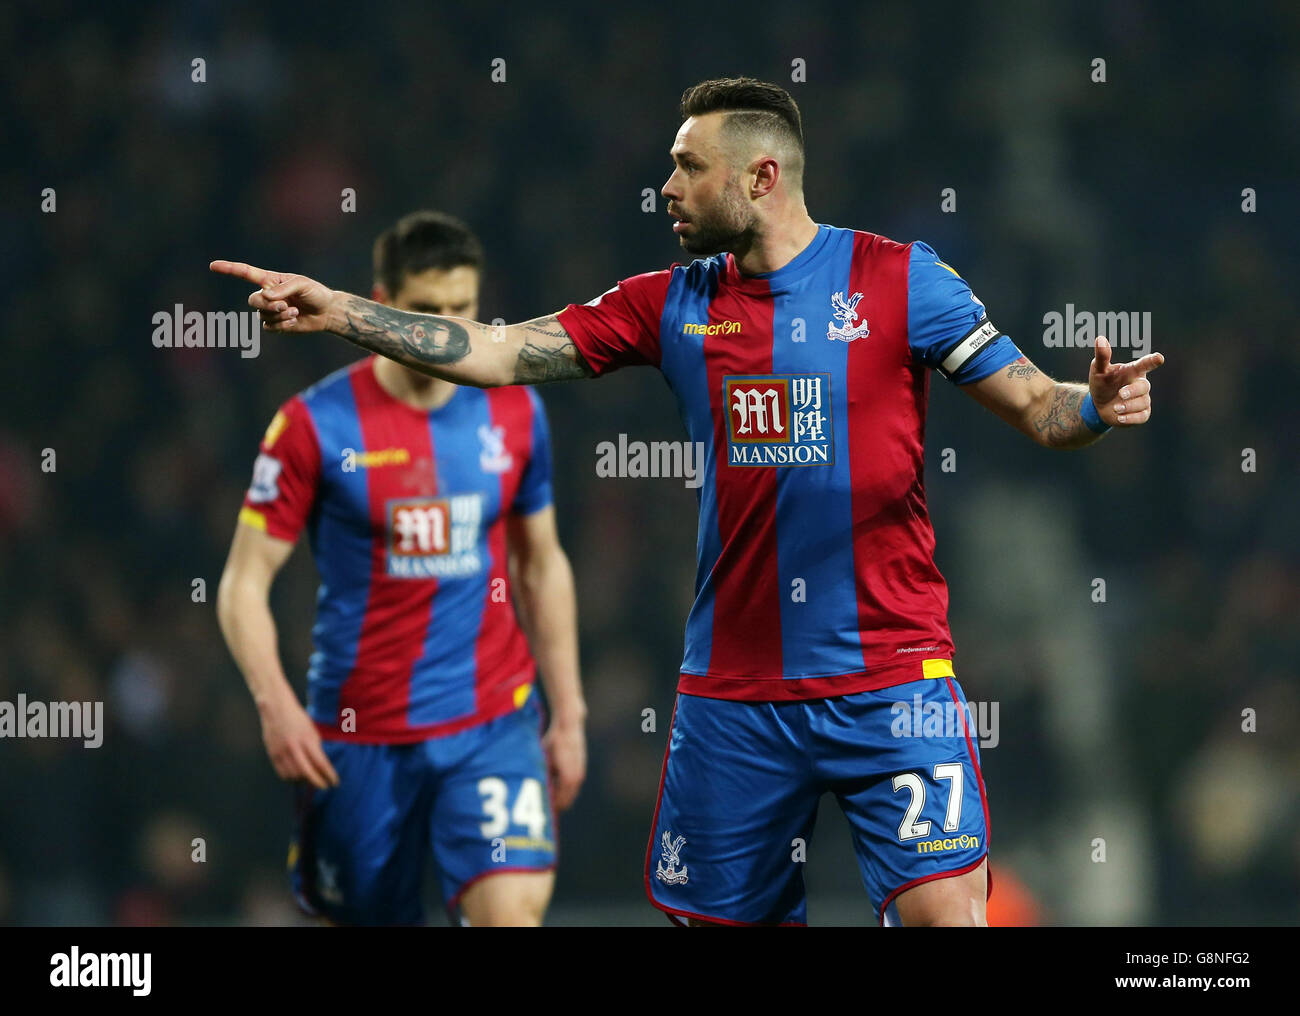 Crystal Palace's Damien Delaney appeals a decision from the linesman during the Barclays Premier League match at The Hawthorns, West Bromwich. Stock Photo